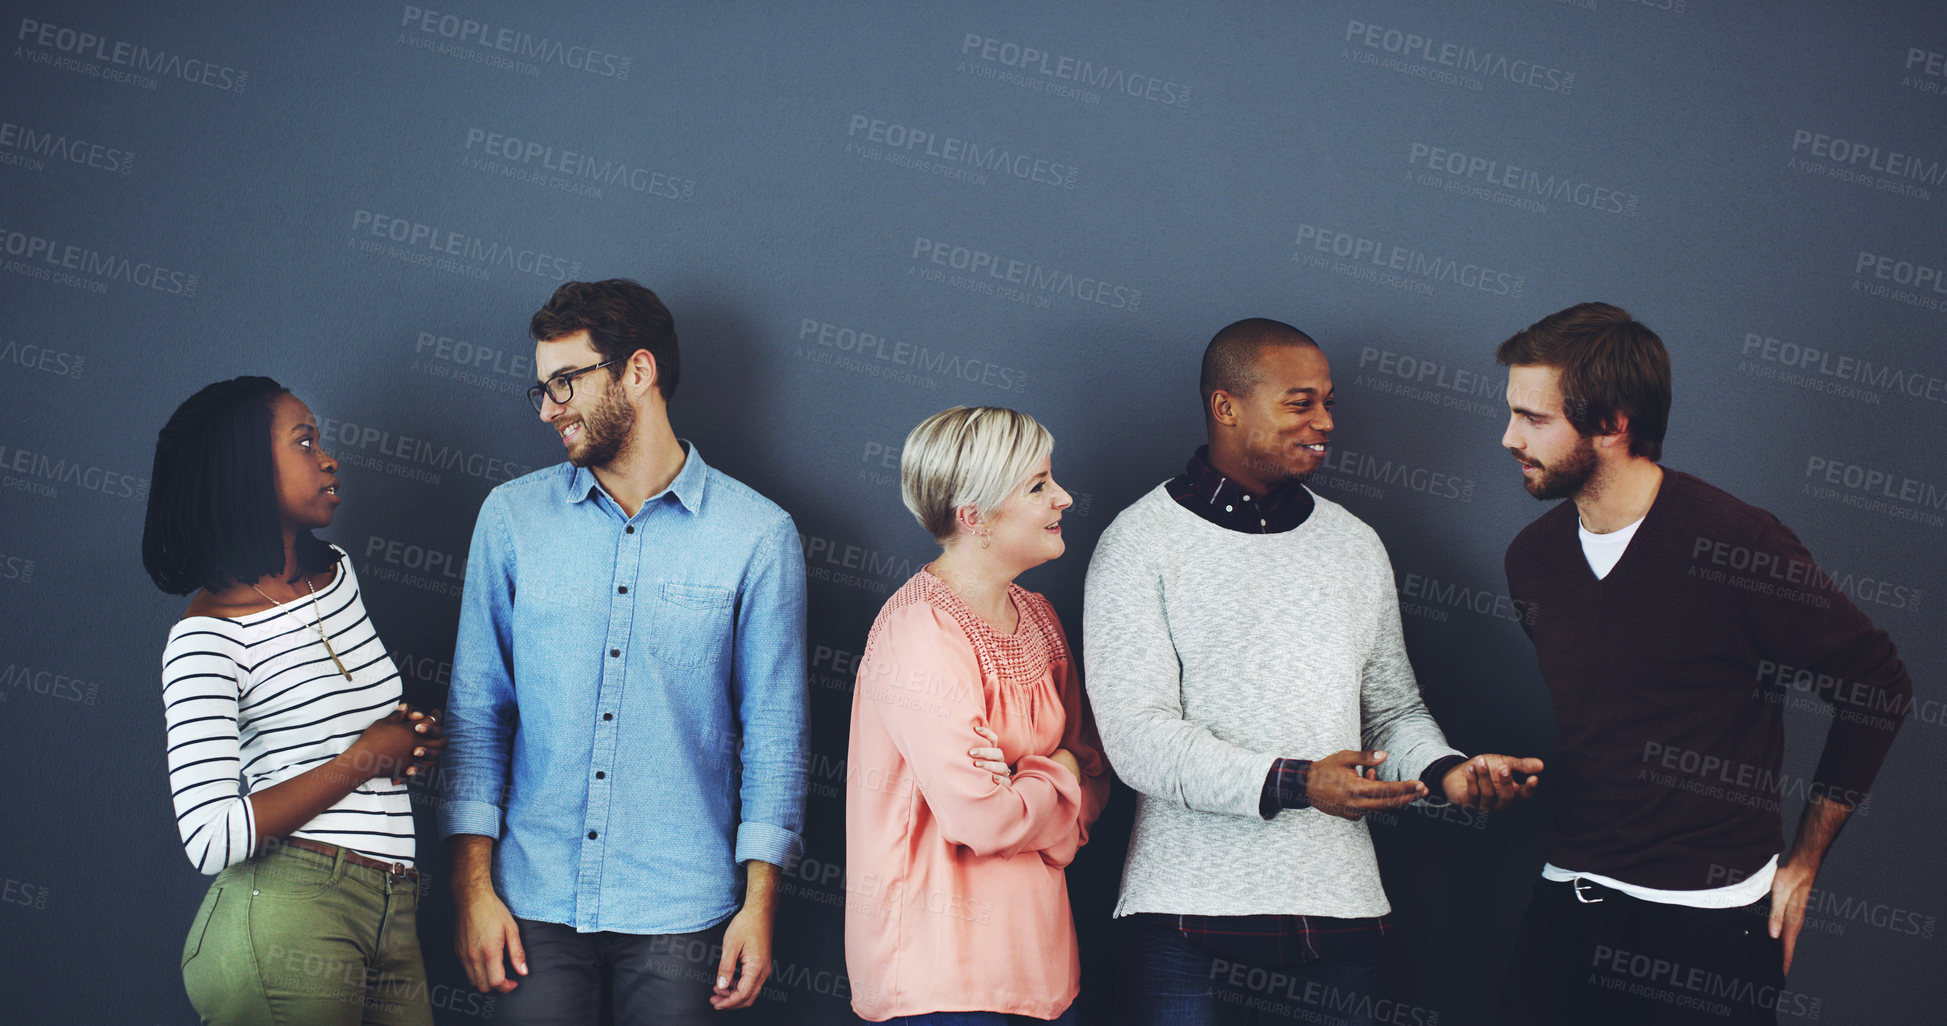 Buy stock photo Studio shot of a diverse group of people standing and chatting against a gray background